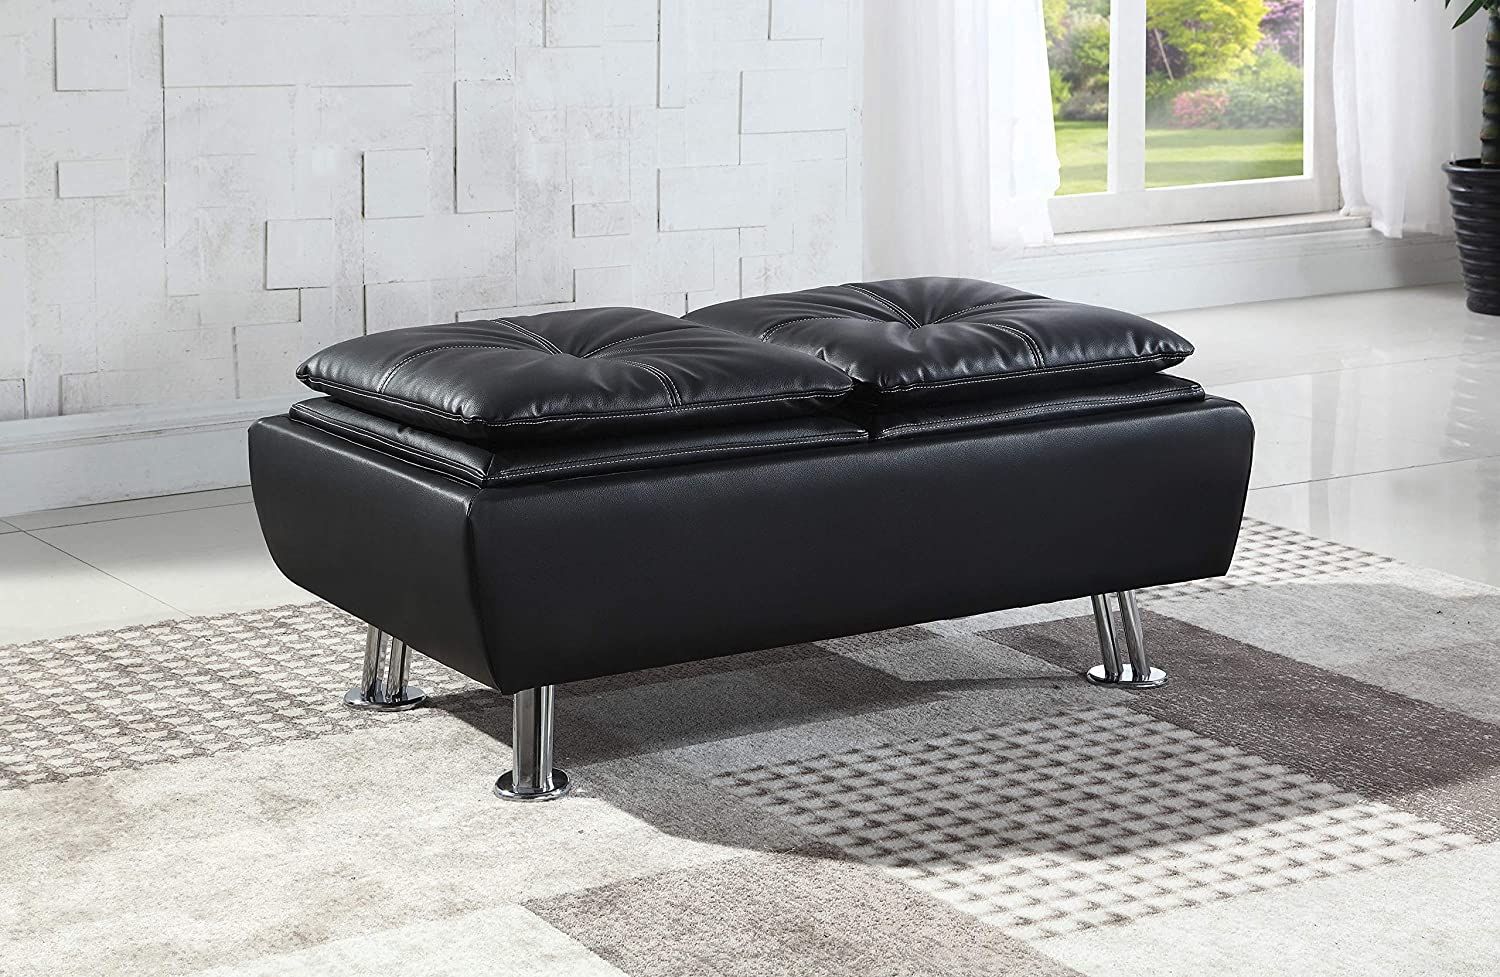 Rafael Faux Leather Storage Ottoman With Reversible Tray Tops Black,  7445043665640 | Ebay With Regard To Ottomans With Stool And Reversible Tray (View 13 of 15)